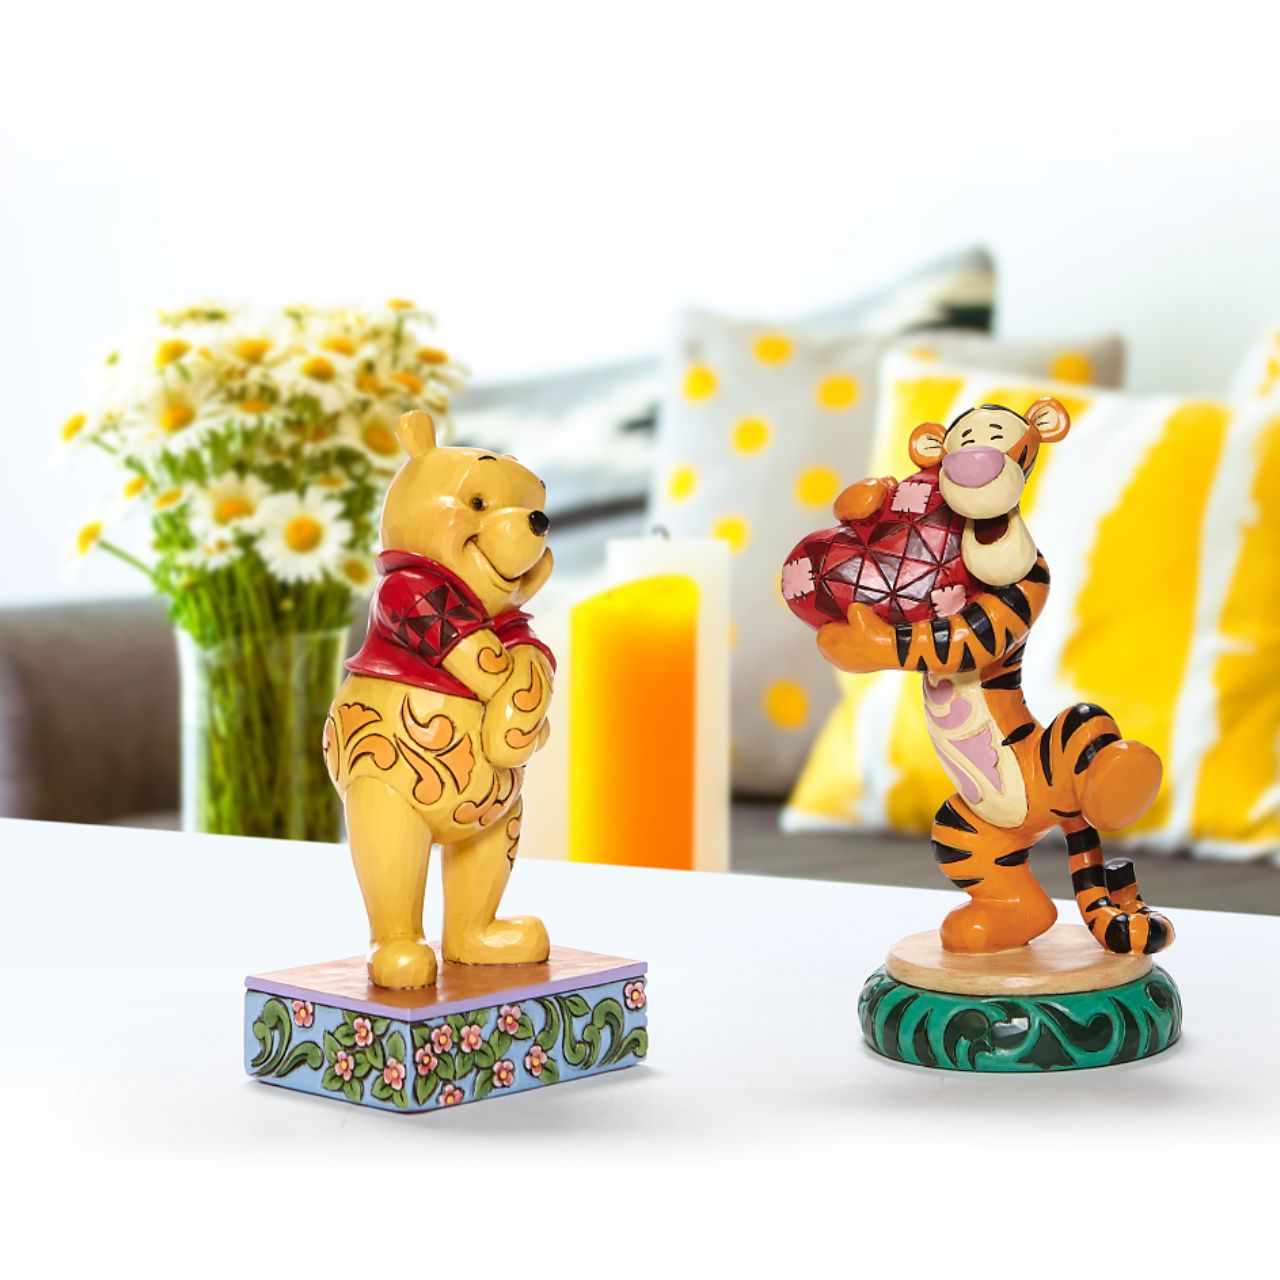 Jim Shore Beloved Bear Winnie the Pooh Personality Pose Figurine  Celebrating the 95th anniversary of the Winnie the Pooh book, this Silly Ol' Bear is happily smiling with his belly full of honey. Jim Shore's design captures the personality of the beloved Winnie the Pooh from the Hundred Acre Wood.